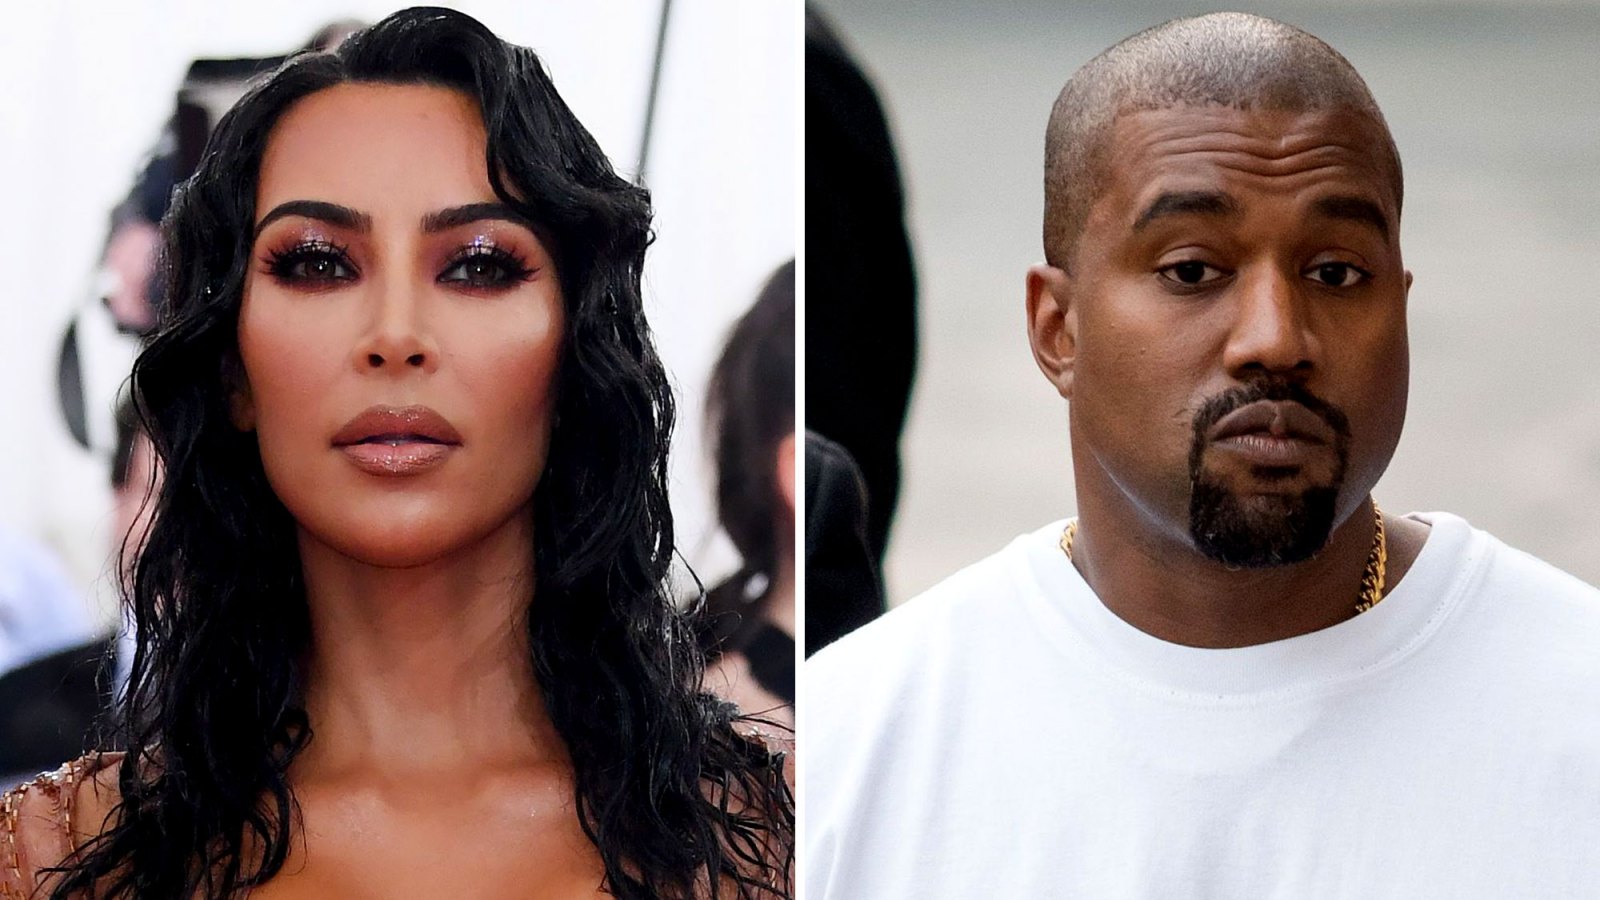 Kim Kardashian bursts into tears commenting on Kanye West's anti-Semitic remarks: 'he is so sad'